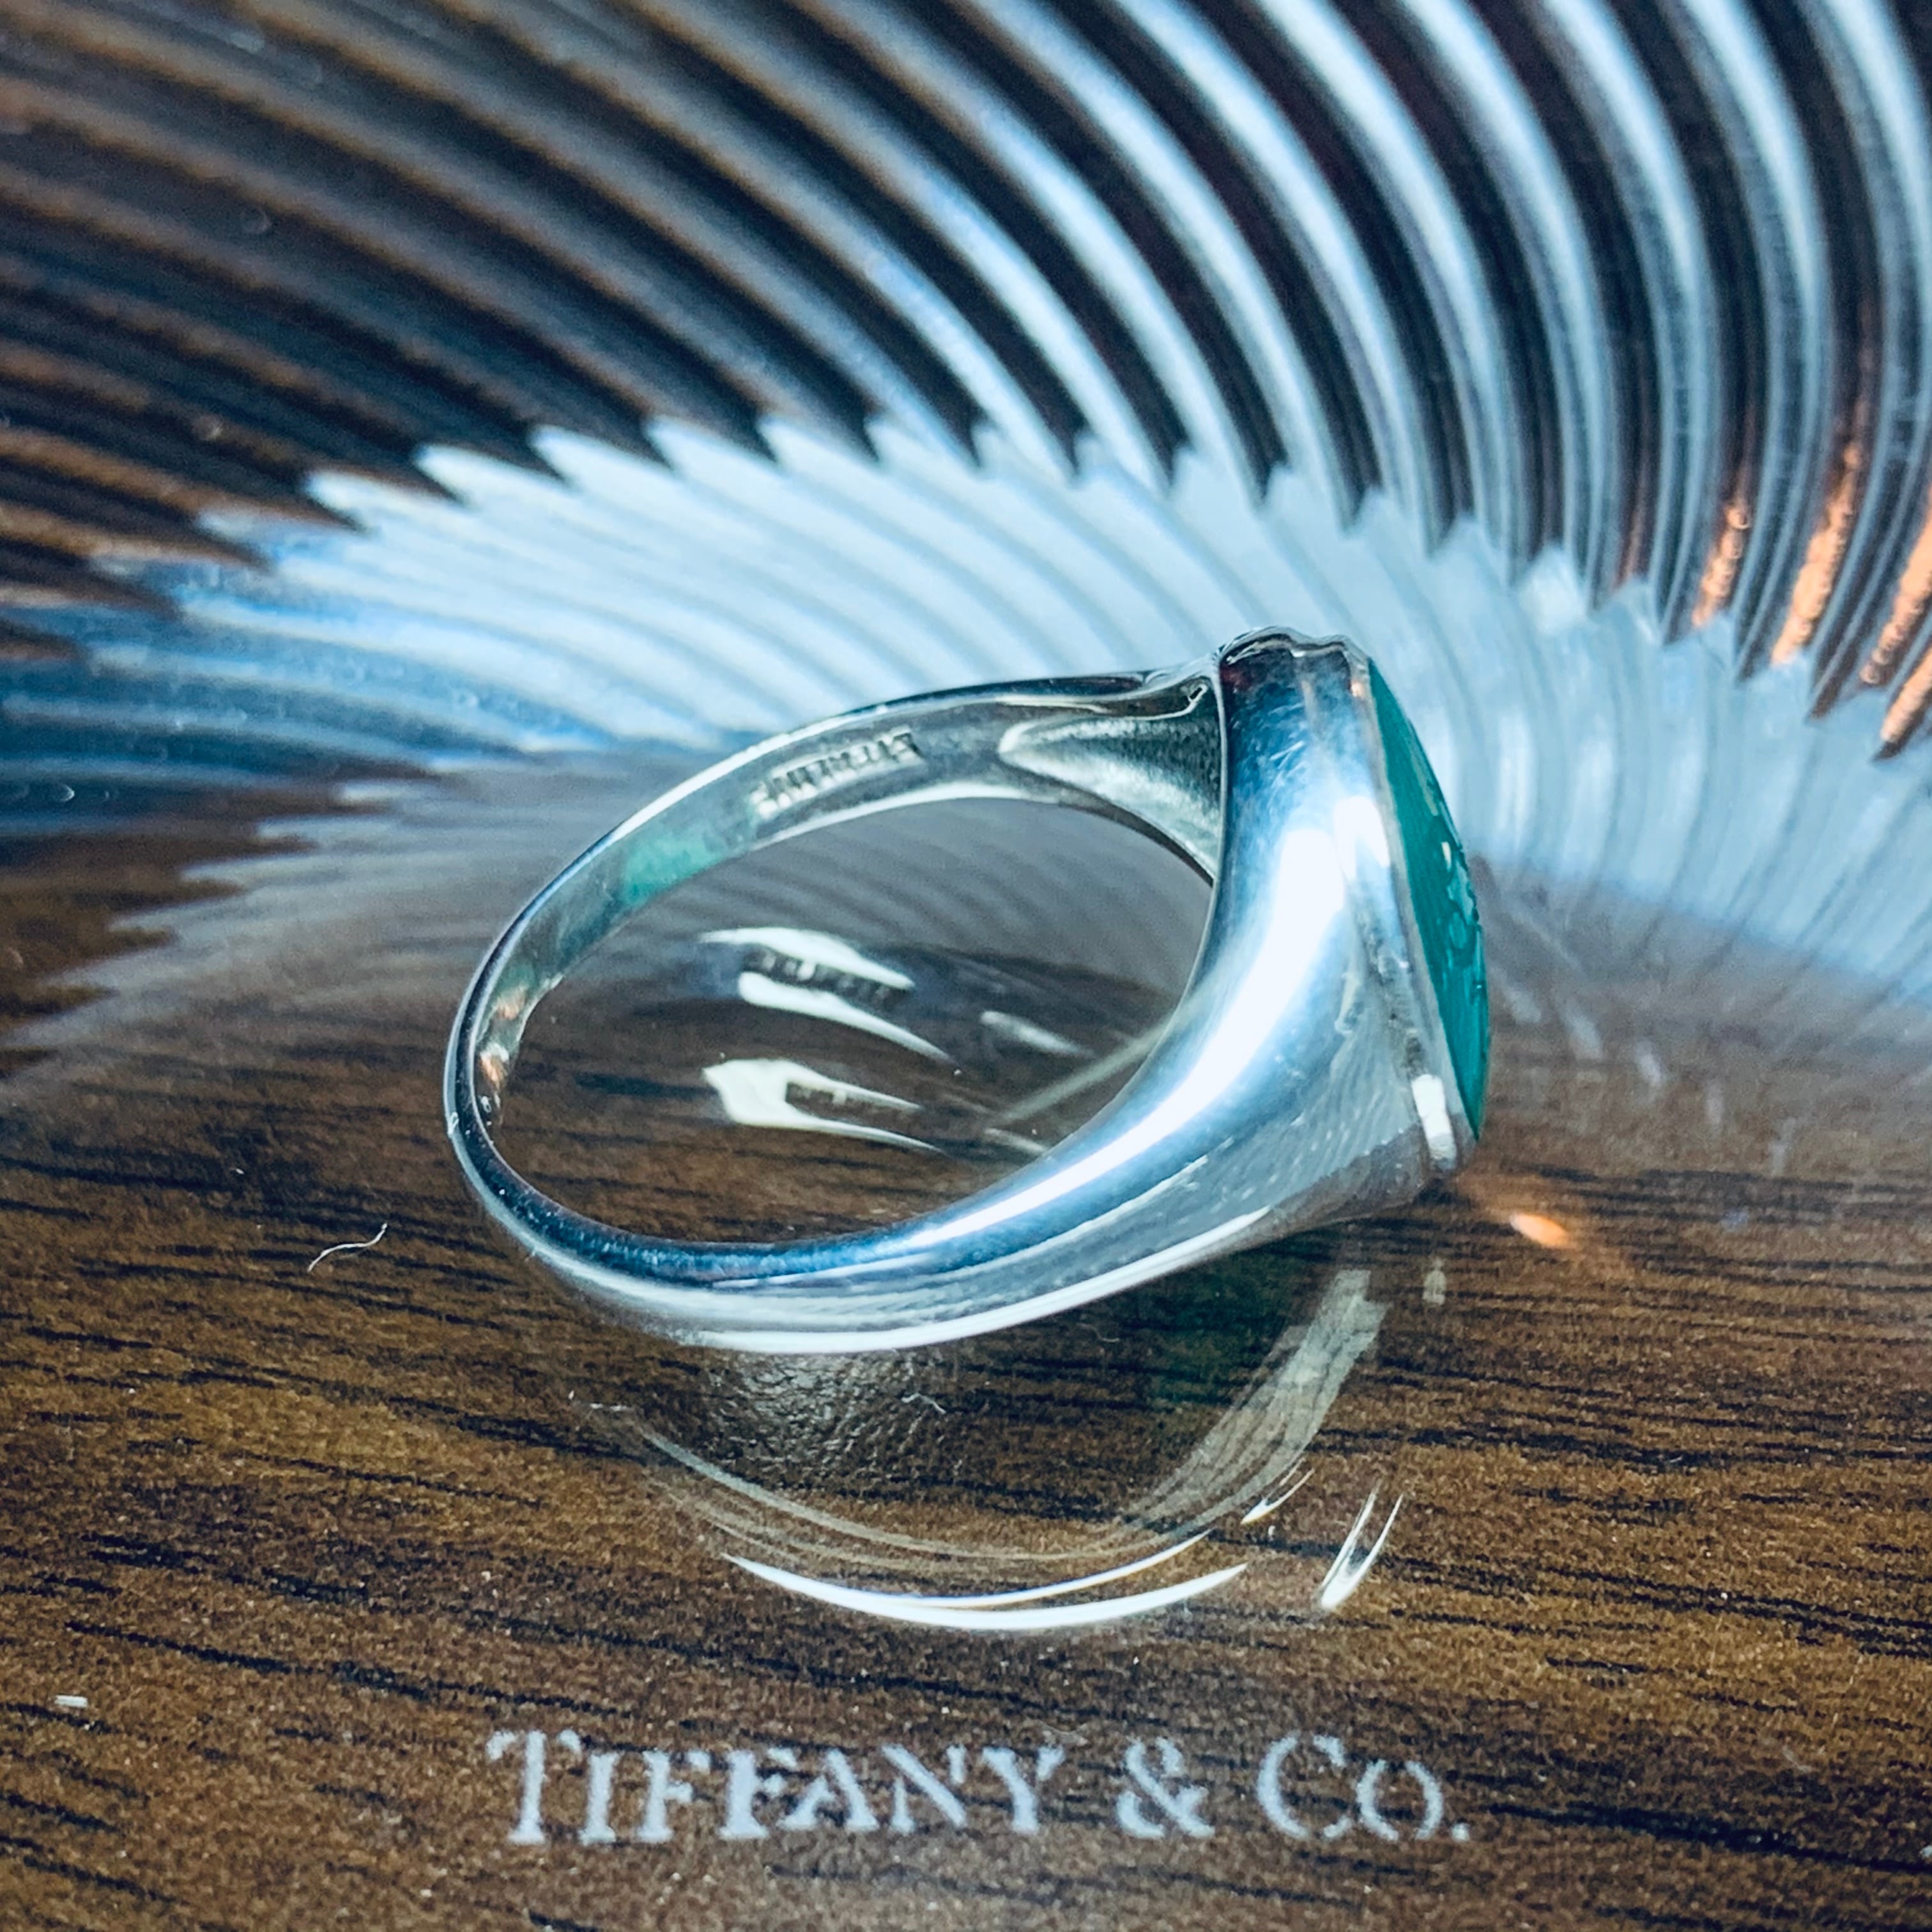 VINTAGE TIFFANY & CO. Green Chalcedony Award Ring Sterling Silver | ヴィンテージ  ティファニー グリーン カルセドニー アワード リング スターリング シルバー | THE OLDER VINTAGE powered by BASE